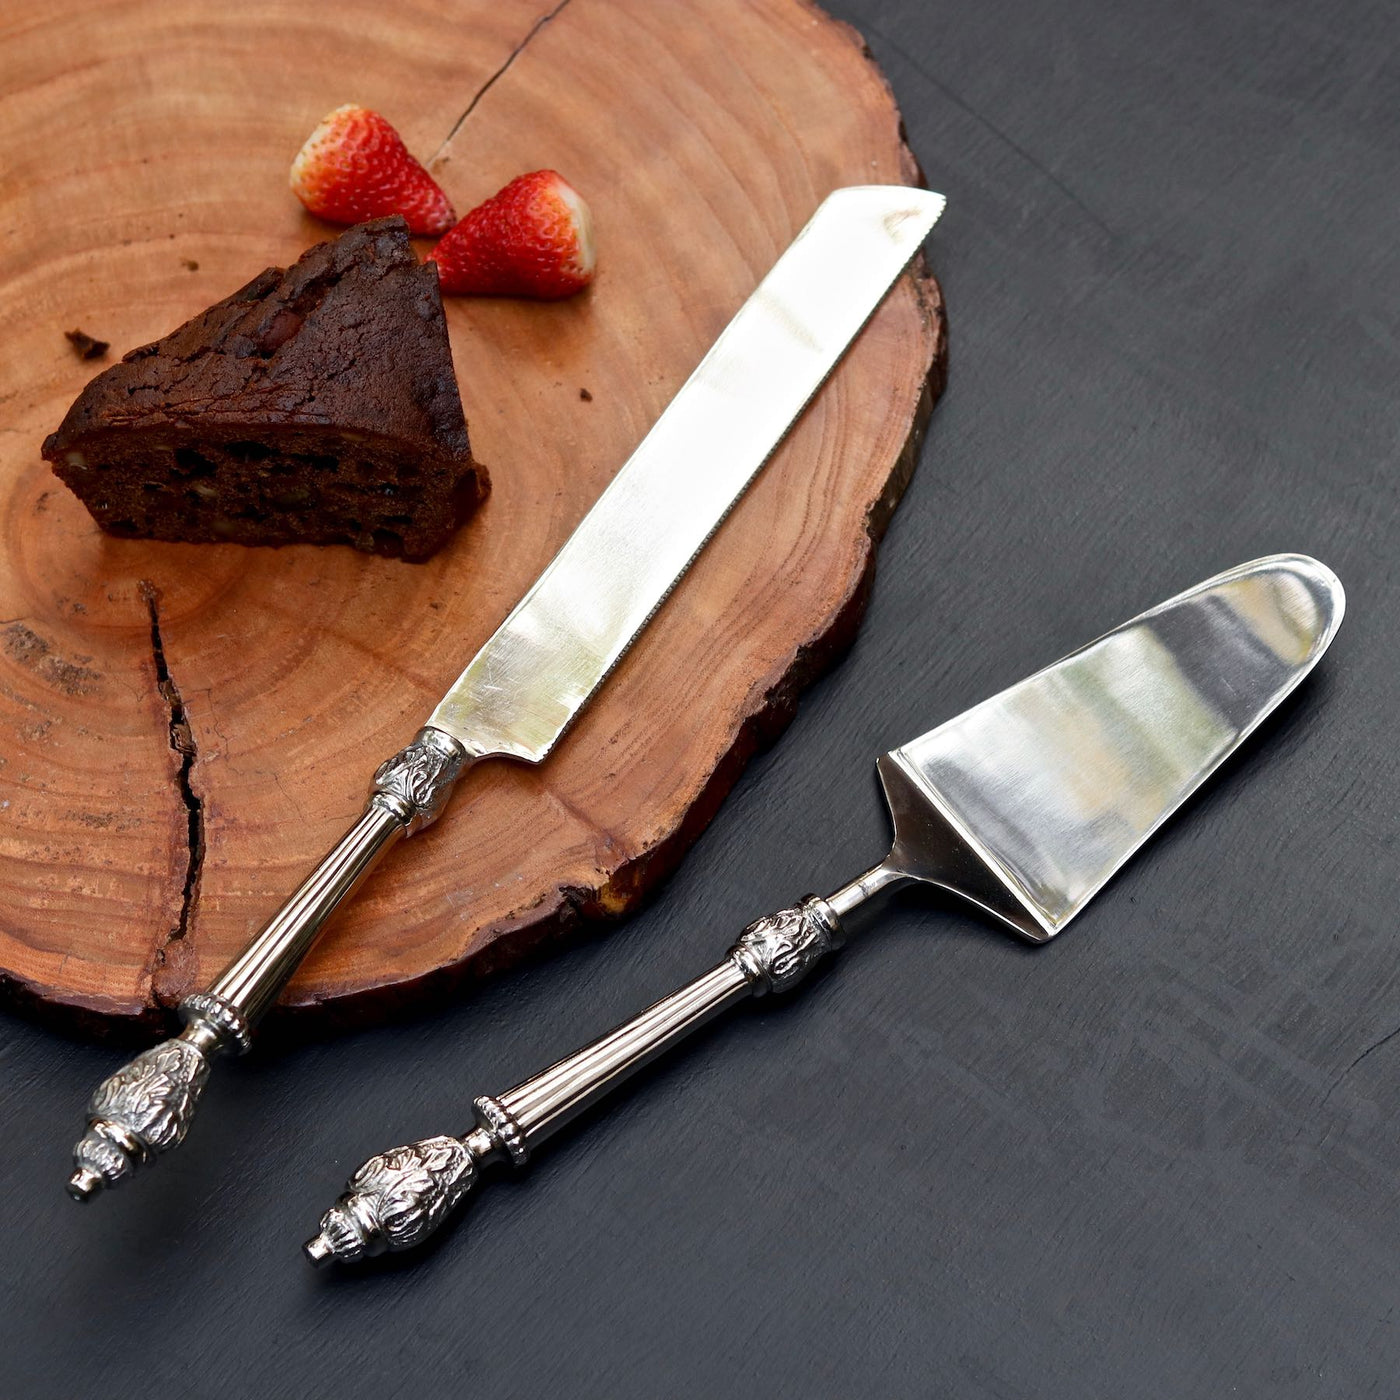 Buy Steel Cake Knife Server Set and Pizza Cutter with Acrylic Handle  3pcs/set Online